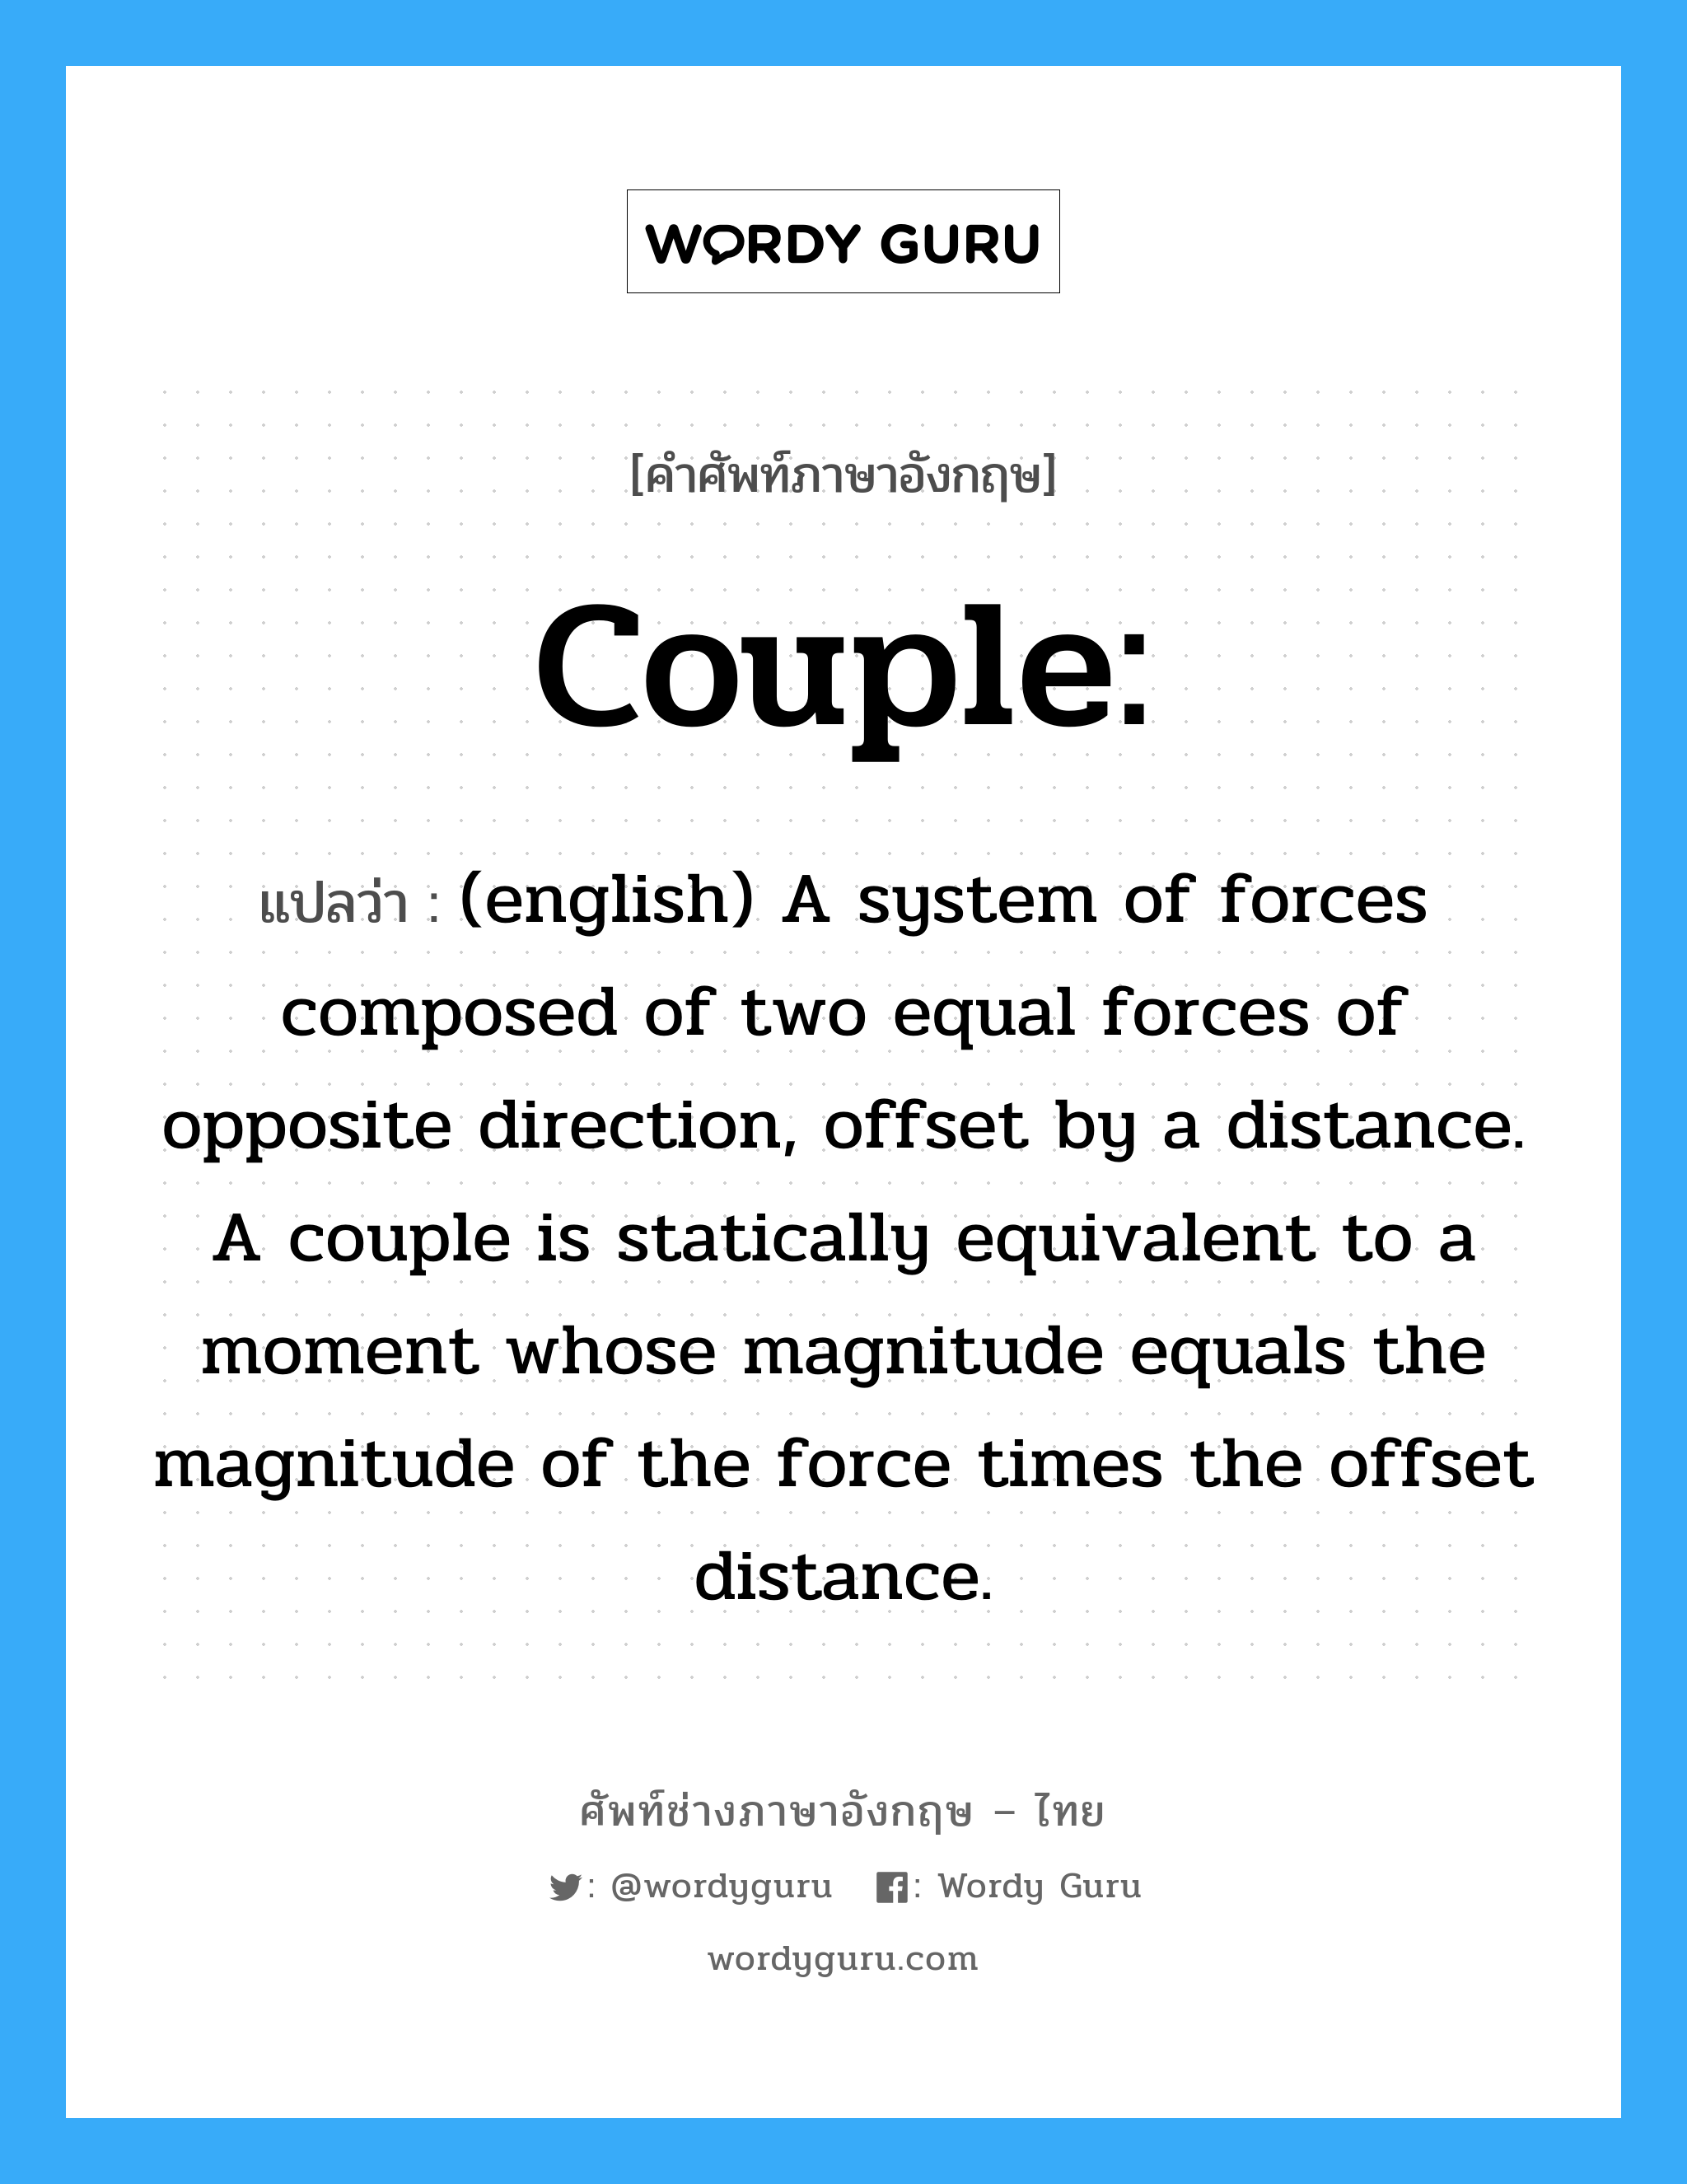 (english) A system of forces composed of two equal forces of opposite direction, offset by a distance. A couple is statically equivalent to a moment whose magnitude equals the magnitude of the force times the offset distance. ภาษาอังกฤษ?, คำศัพท์ช่างภาษาอังกฤษ - ไทย (english) A system of forces composed of two equal forces of opposite direction, offset by a distance. A couple is statically equivalent to a moment whose magnitude equals the magnitude of the force times the offset distance. คำศัพท์ภาษาอังกฤษ (english) A system of forces composed of two equal forces of opposite direction, offset by a distance. A couple is statically equivalent to a moment whose magnitude equals the magnitude of the force times the offset distance. แปลว่า Couple: